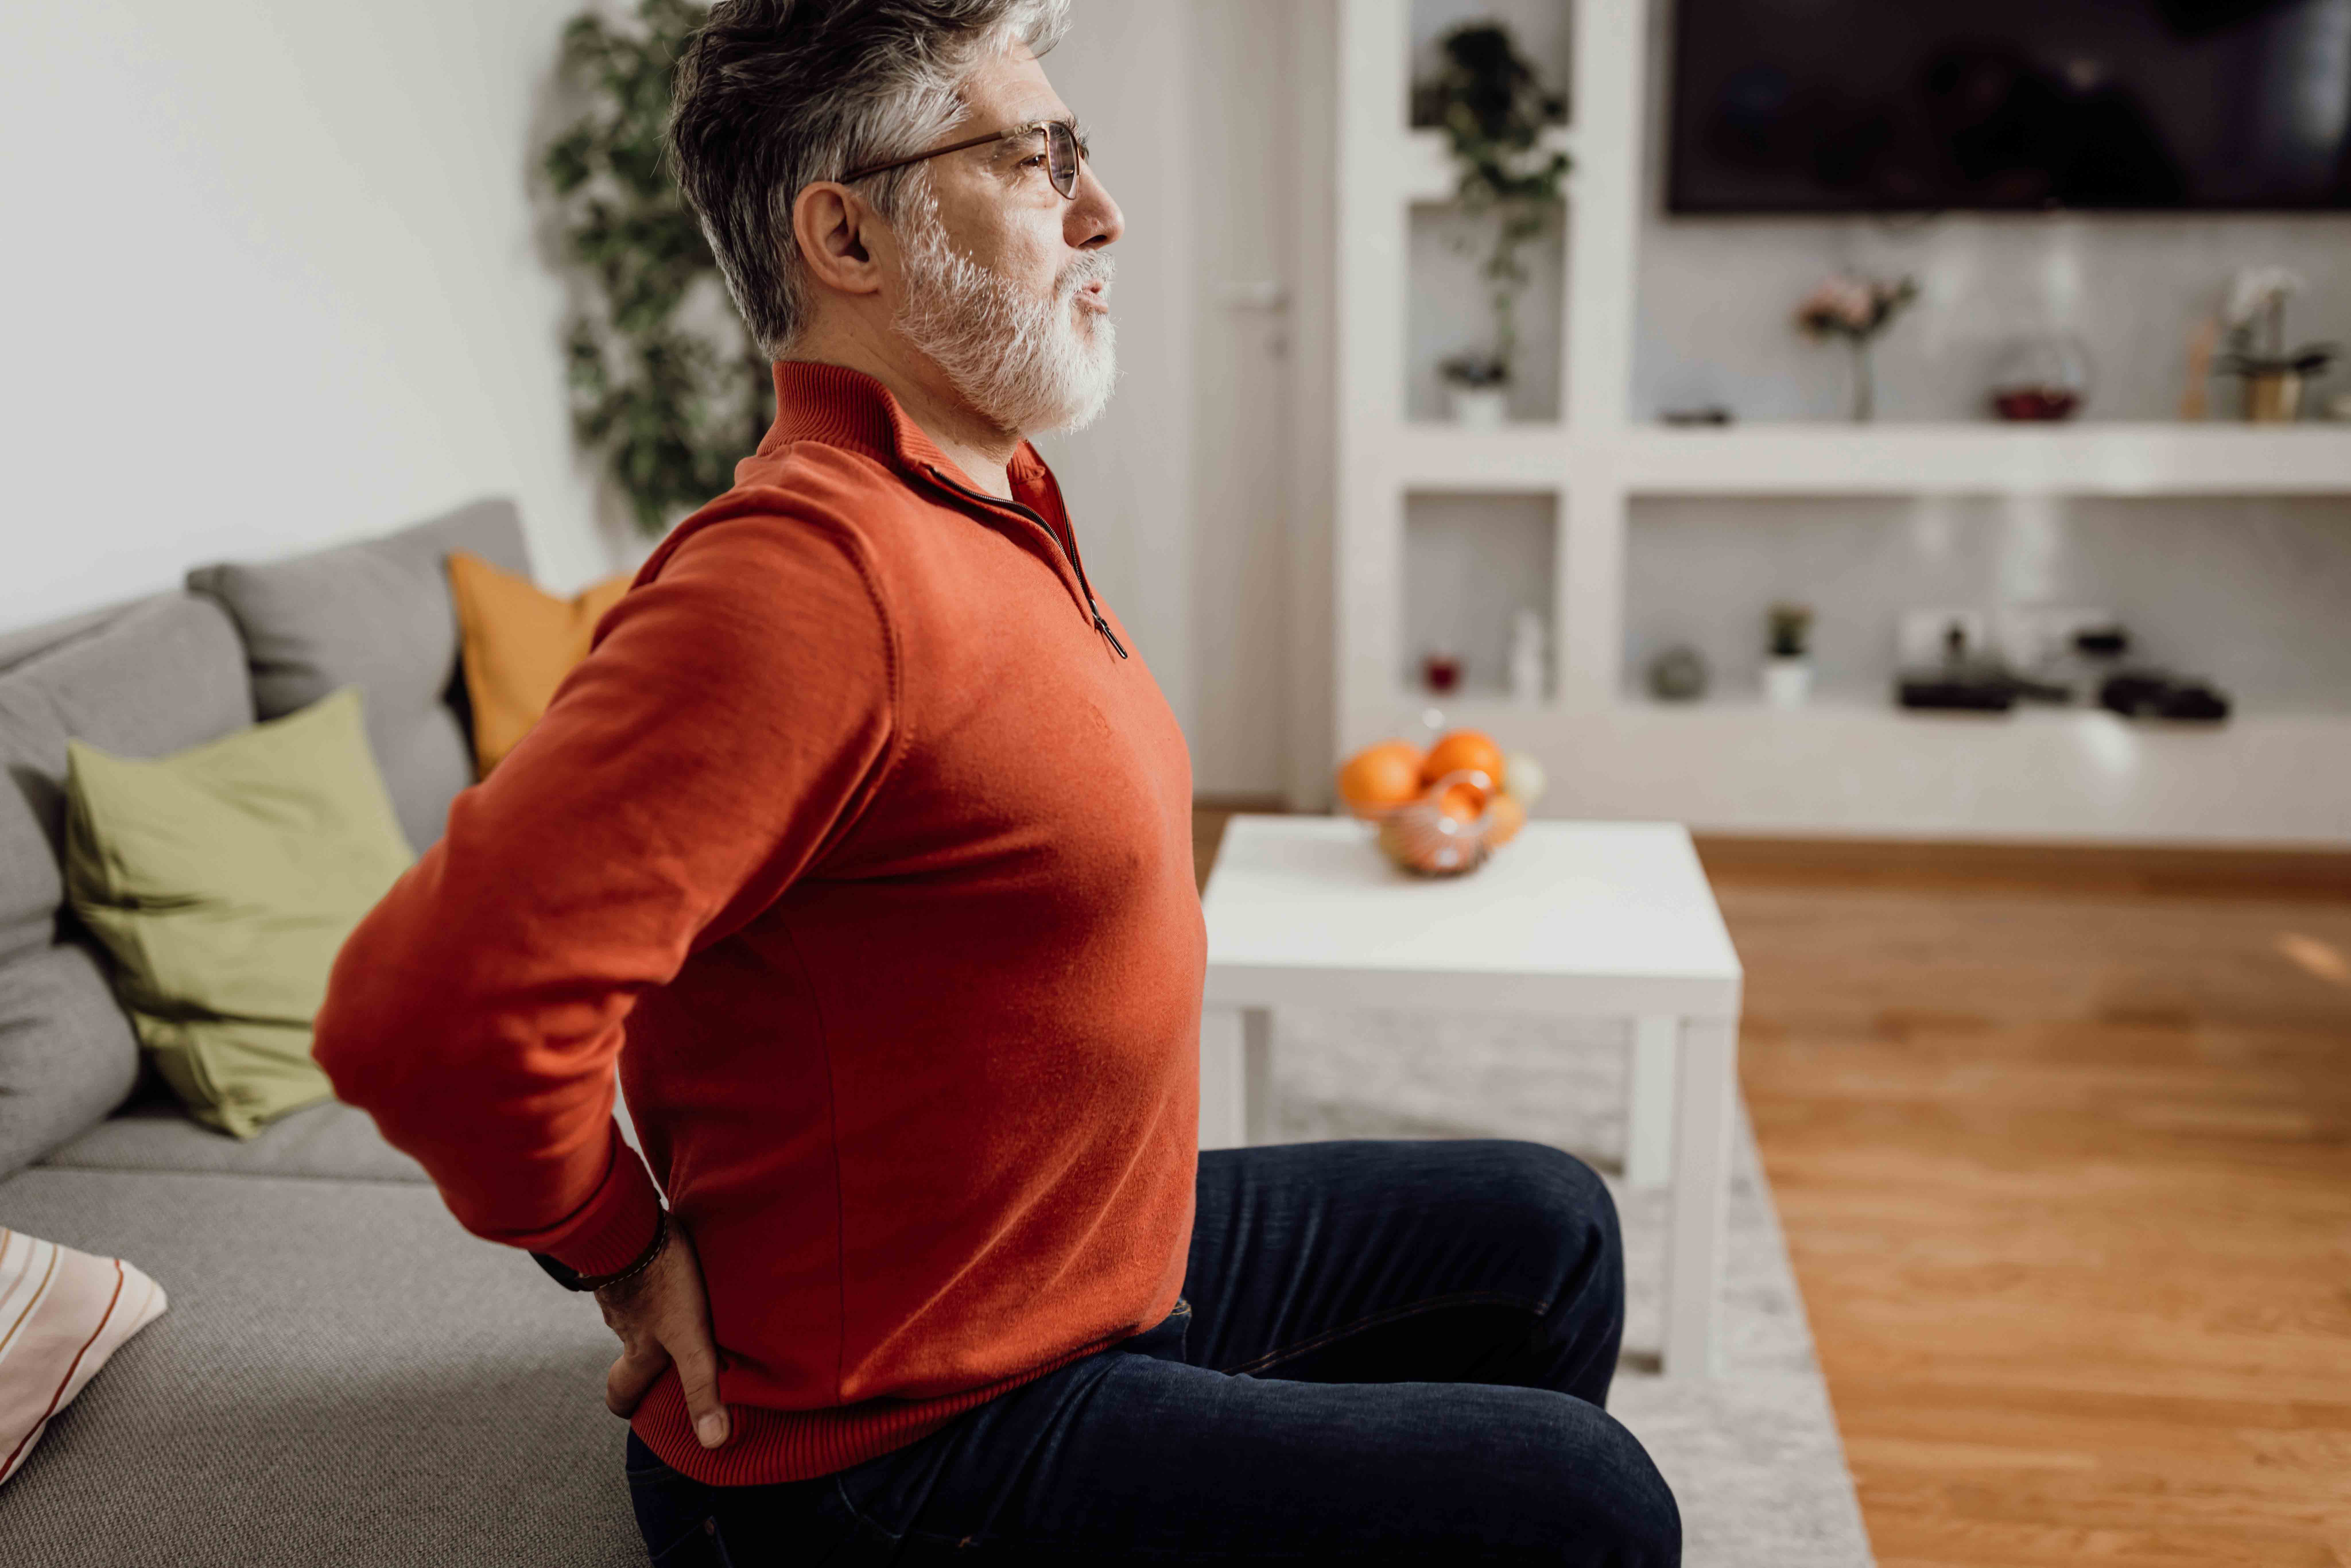 Side view worried mature man sitting at his living room couch holding hands on his painful lower back suggesting perhaps sciatica or other low back pain condition